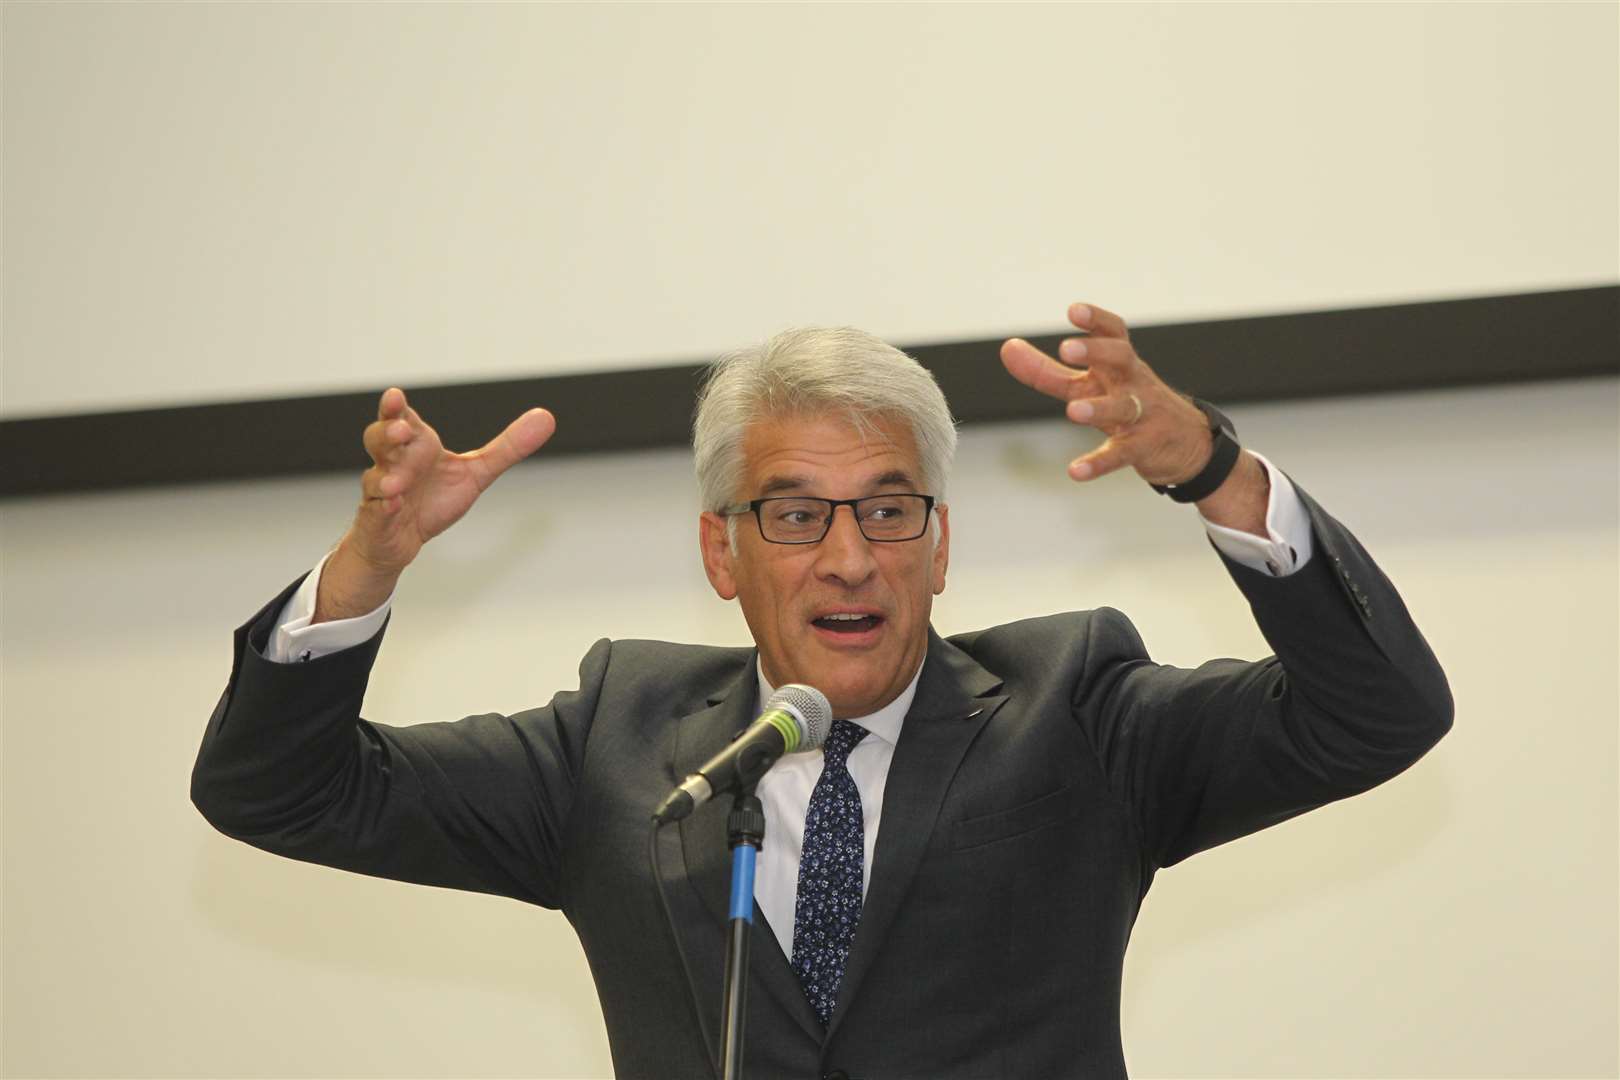 Rev Steve Chalke, the founder of The Oasis Academy, talks to an audience